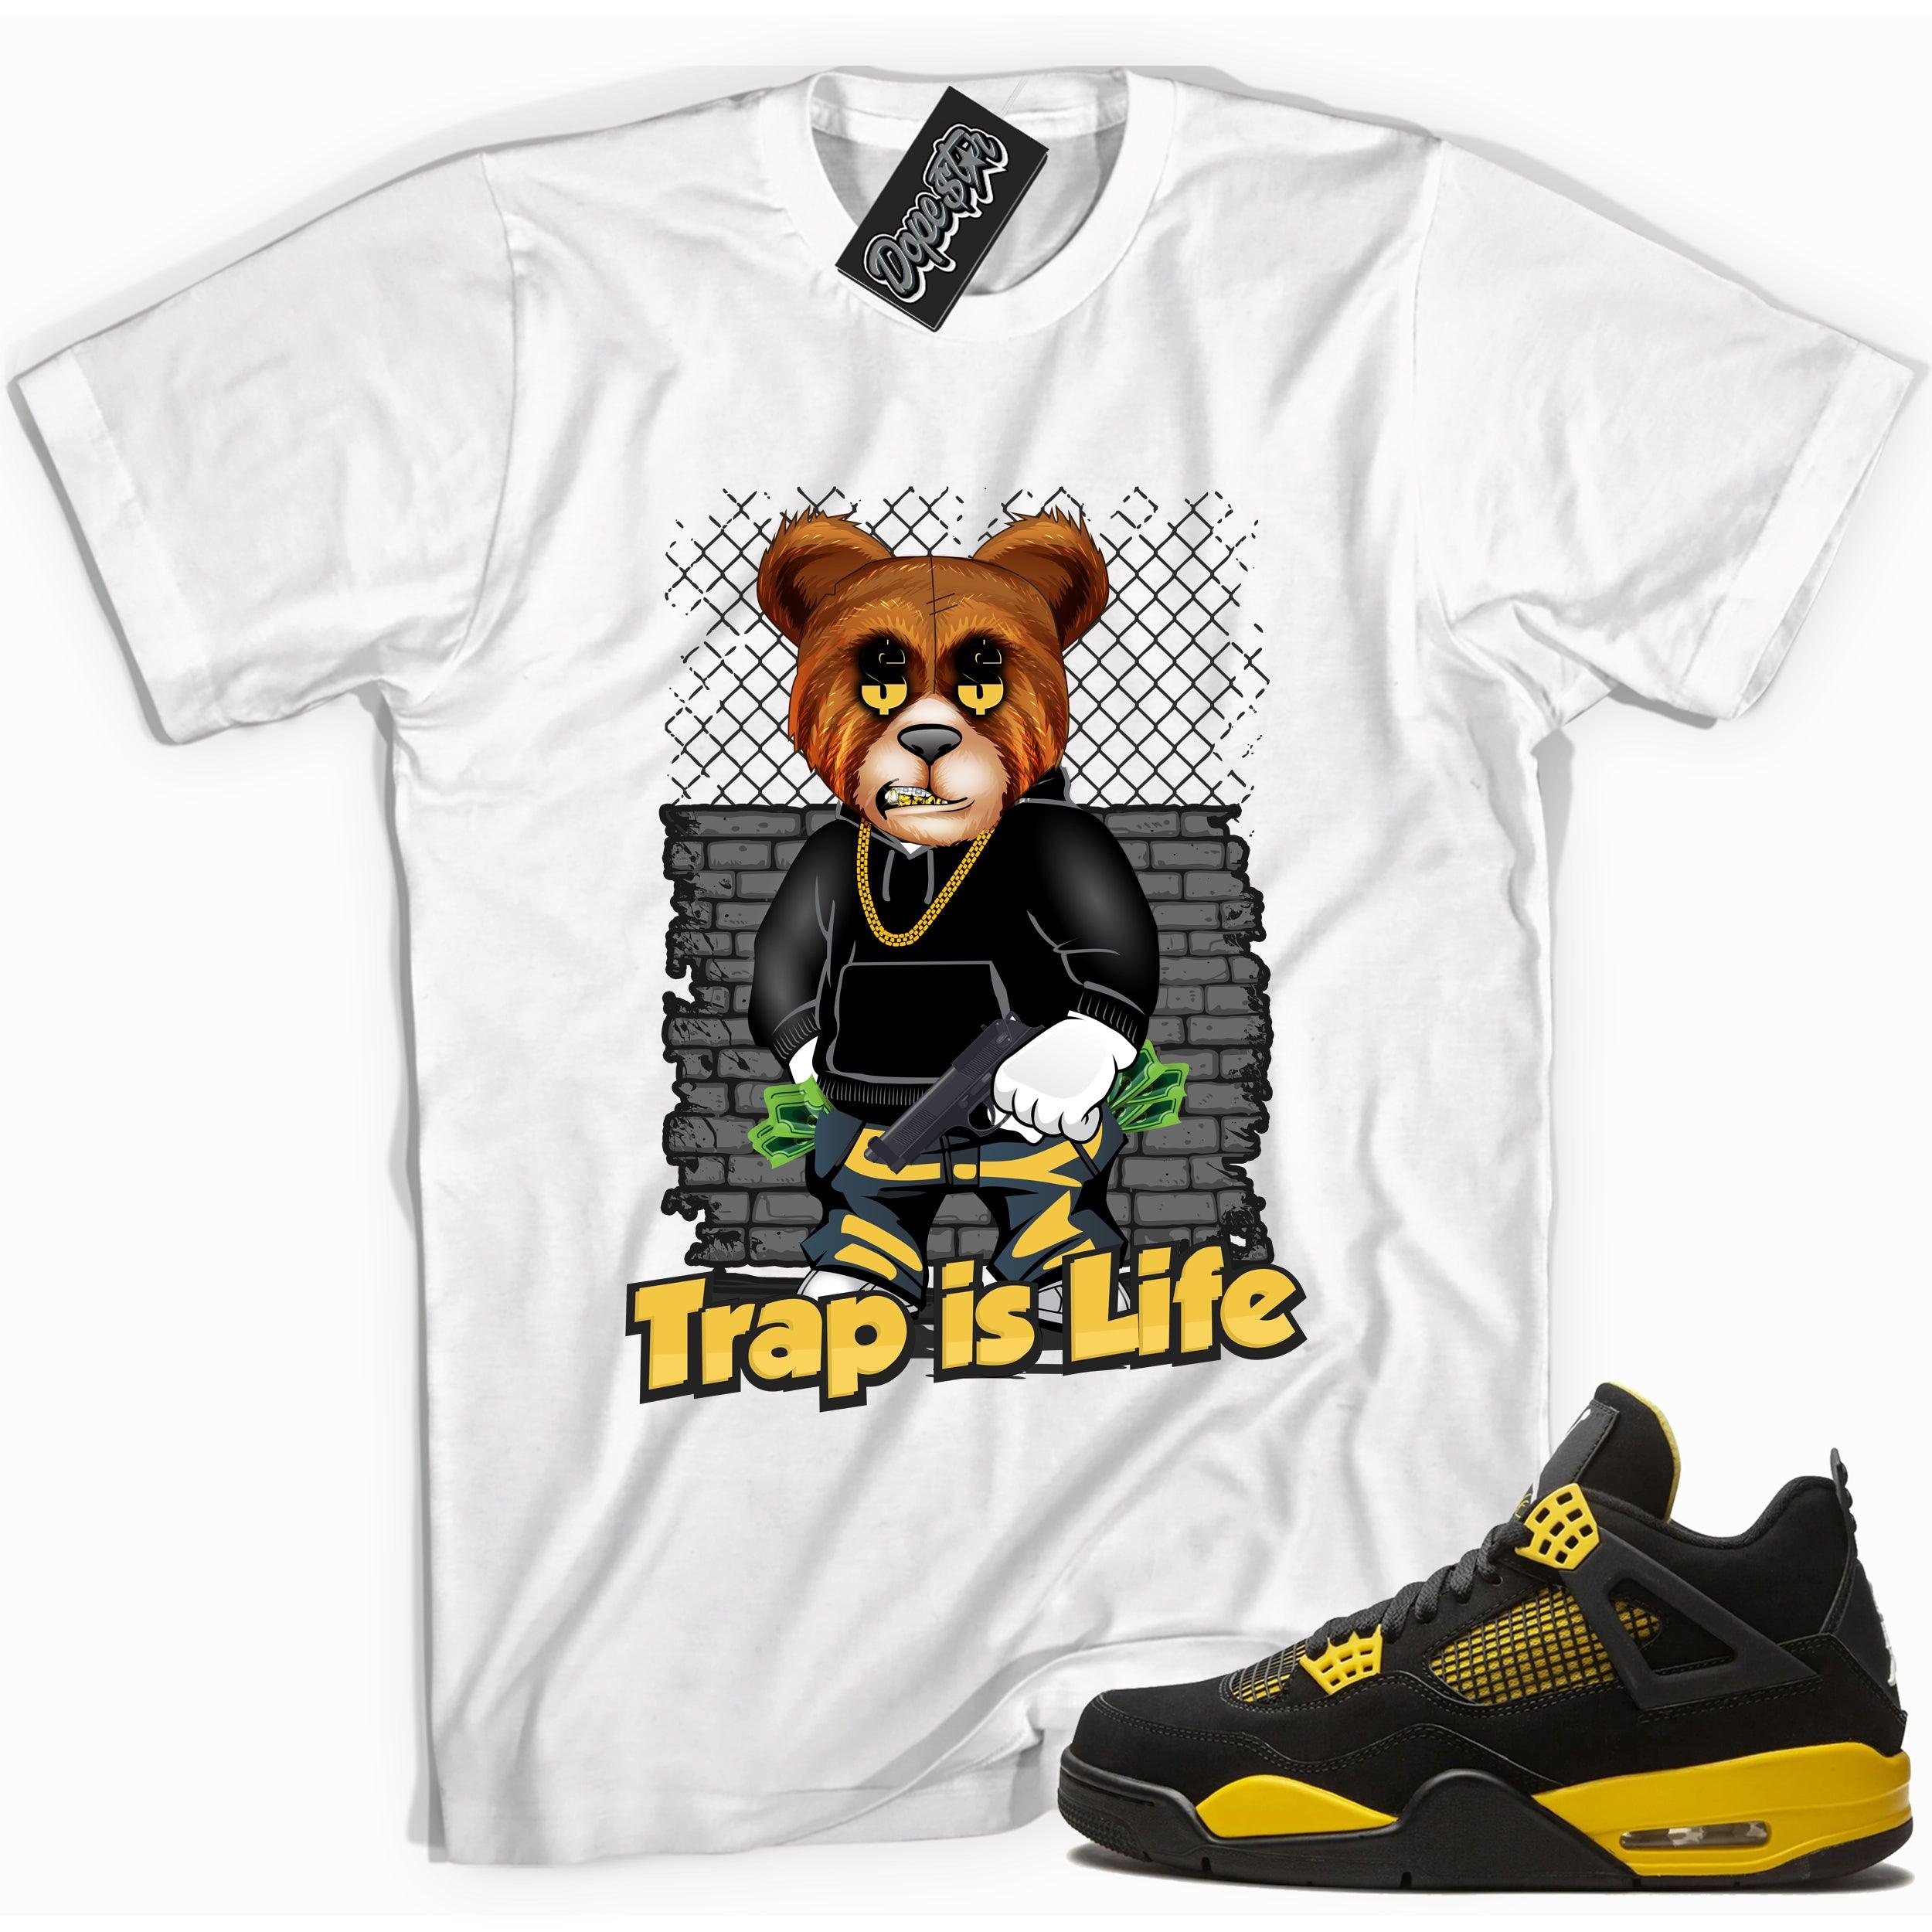 Cool white graphic tee with 'trap is life' print, that perfectly matches Air Jordan 4 Thunder sneakers